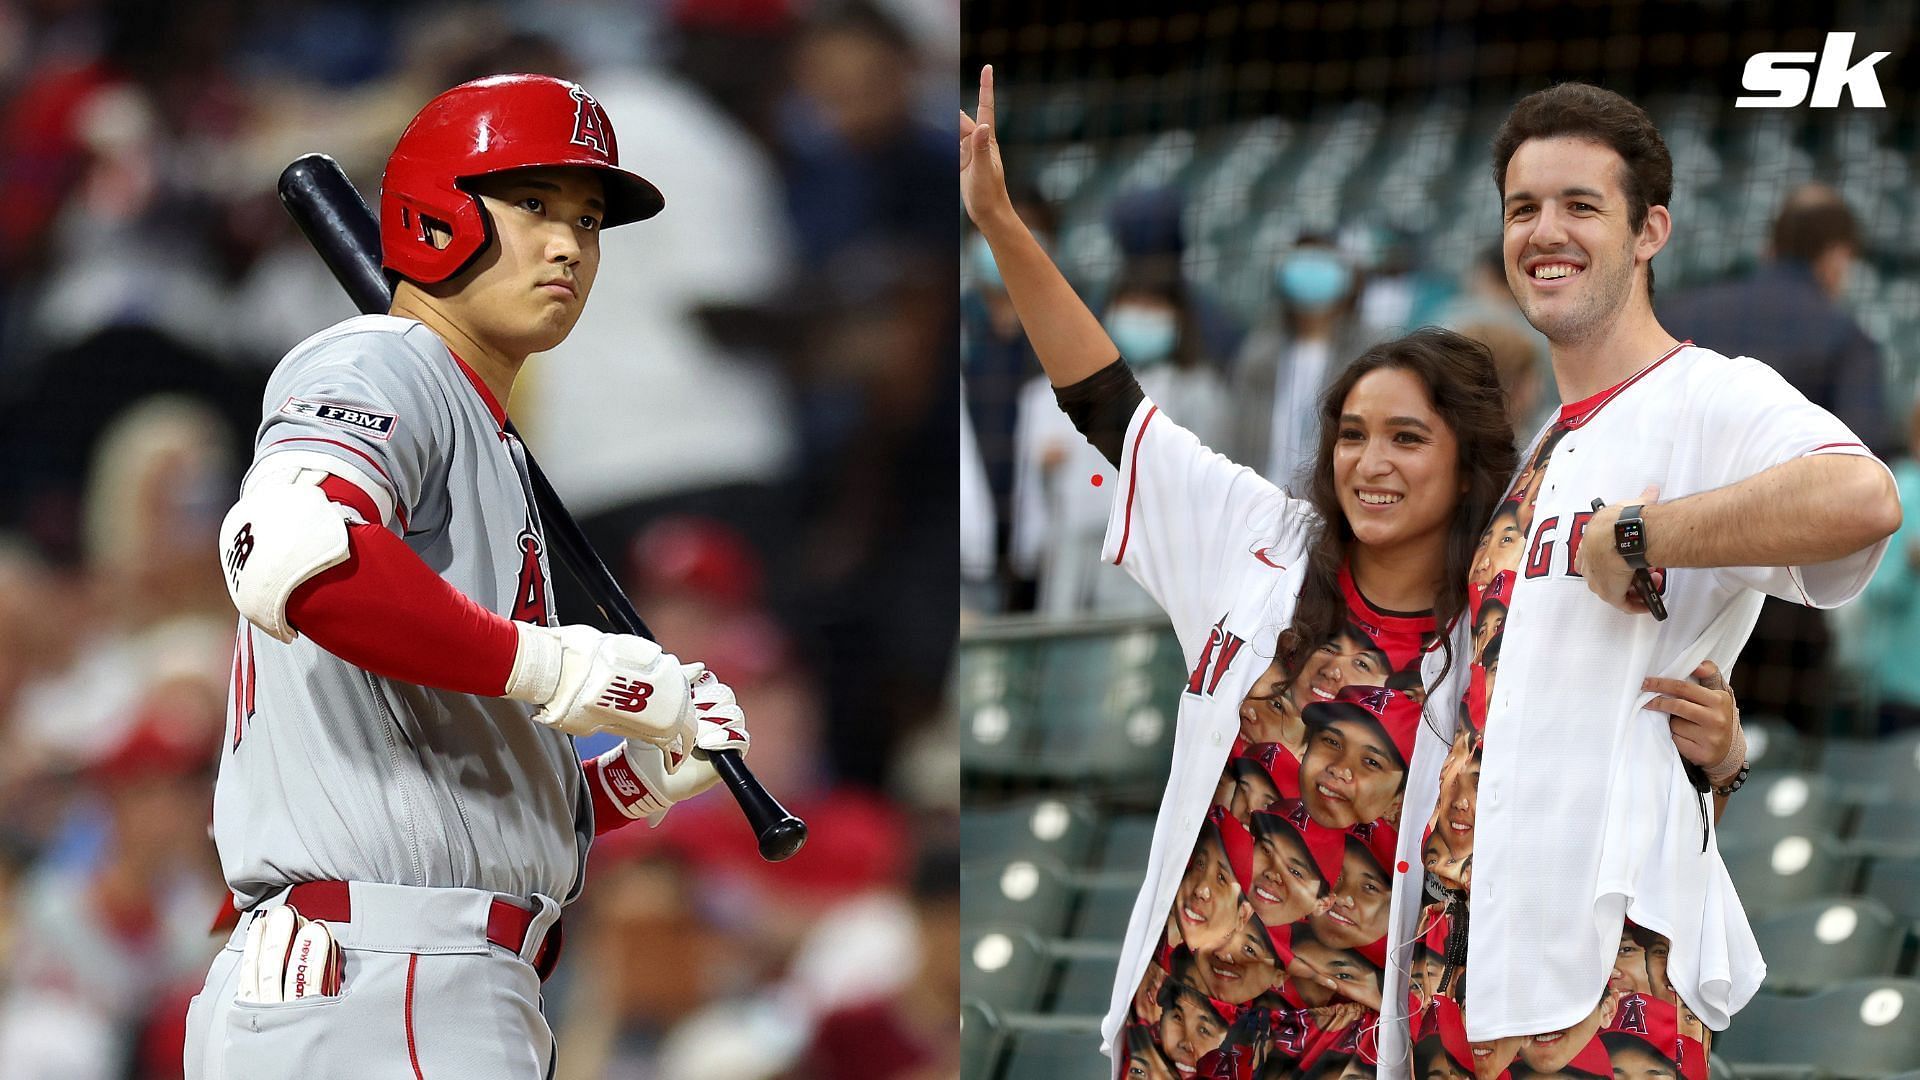 Figures have shown that Shohei Ohtani